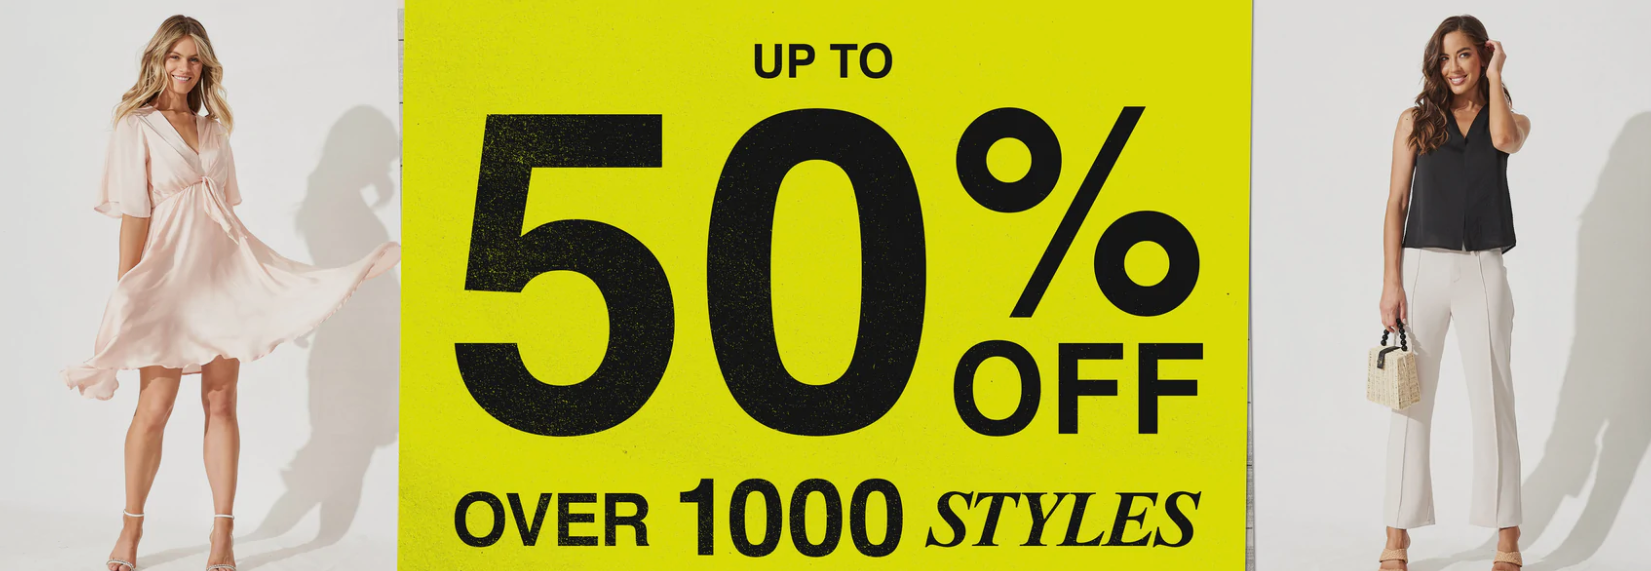 Up to 50% OFF on End of Season sale styles at St Frock